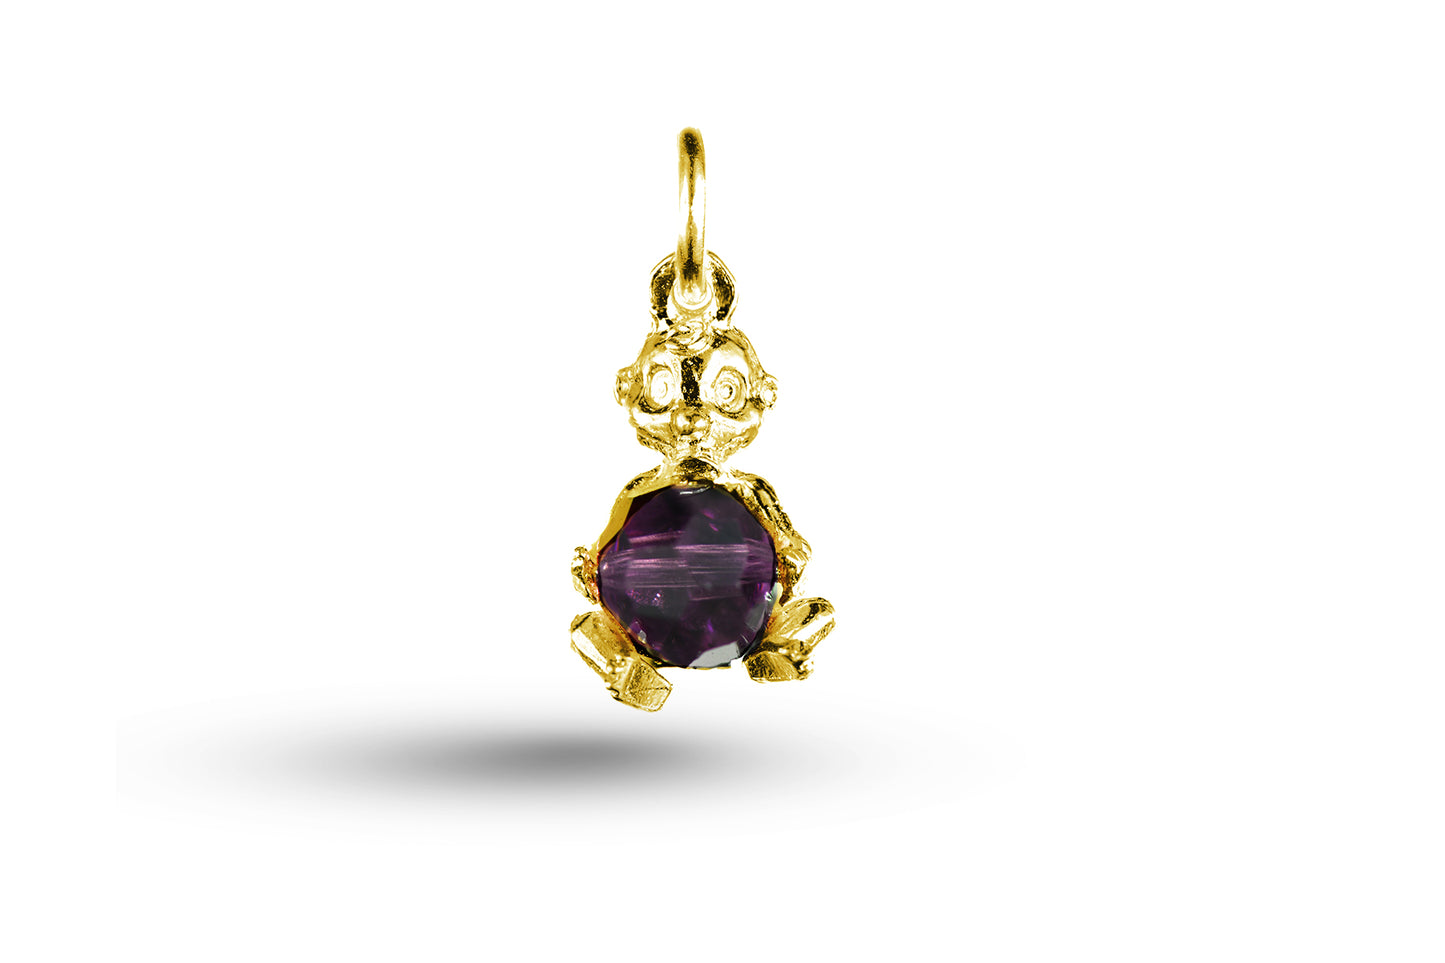 Luxury yellow gold baby and ball with stone charm.